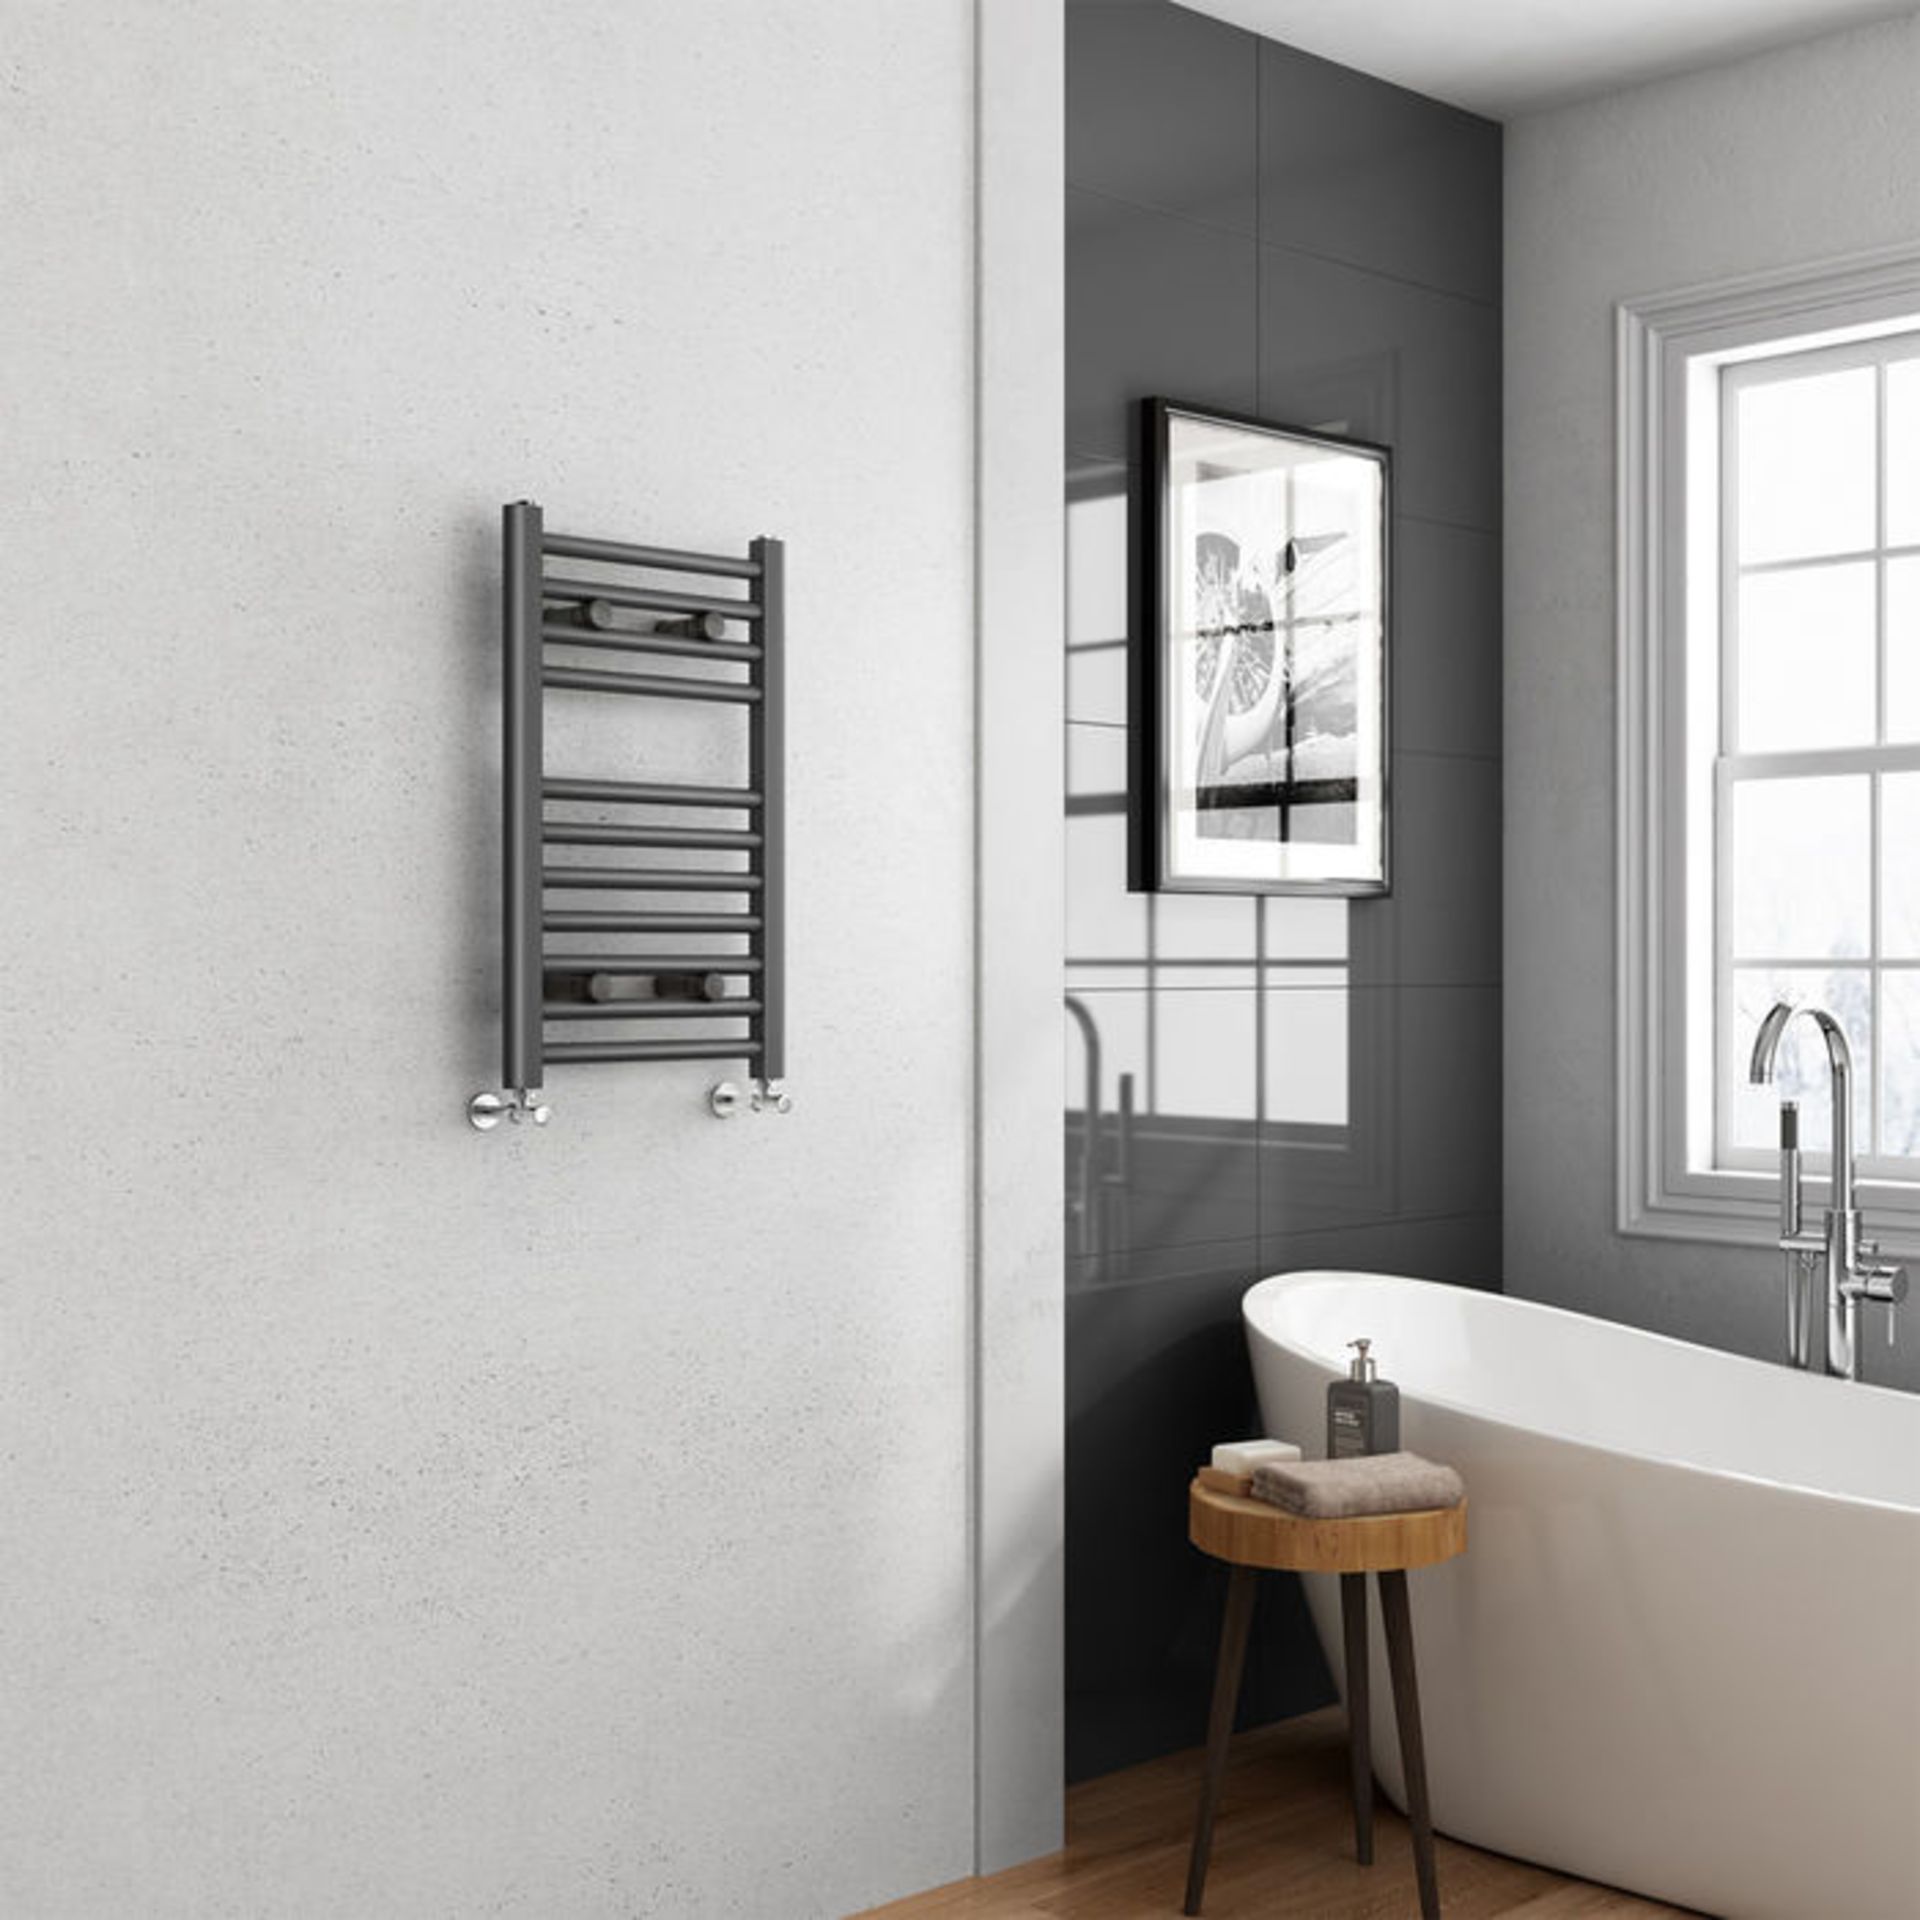 (L155) 650x400mm - 25mm Tubes - Anthracite Heated Straight Rail Ladder Towel Radiator. RRP £124. - Image 3 of 3